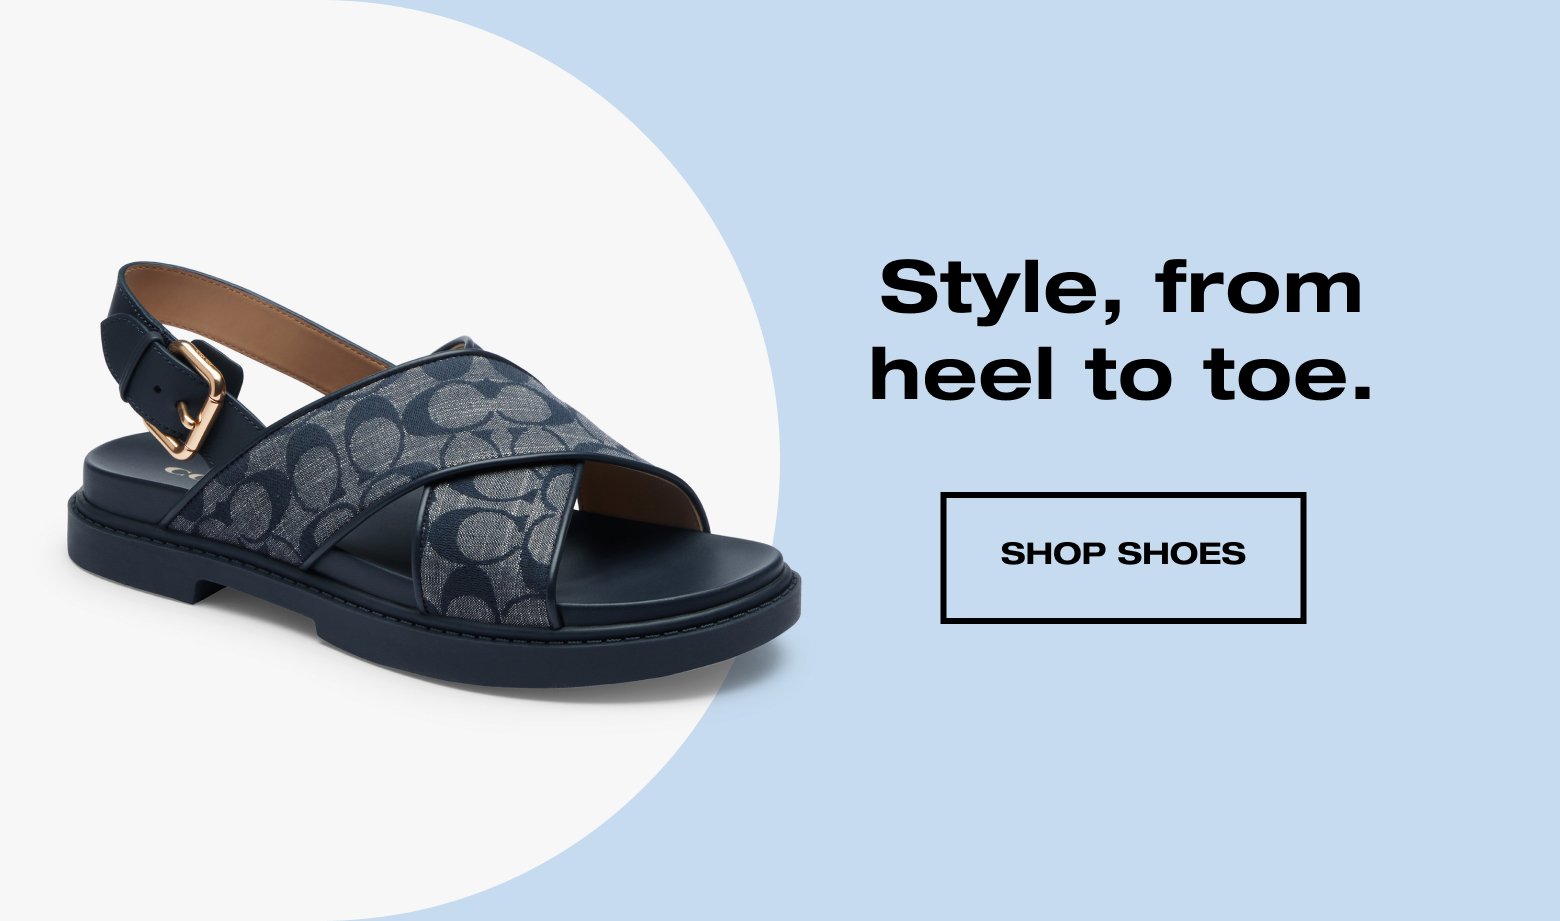 Style, from heel to toe. SHOP SHOES